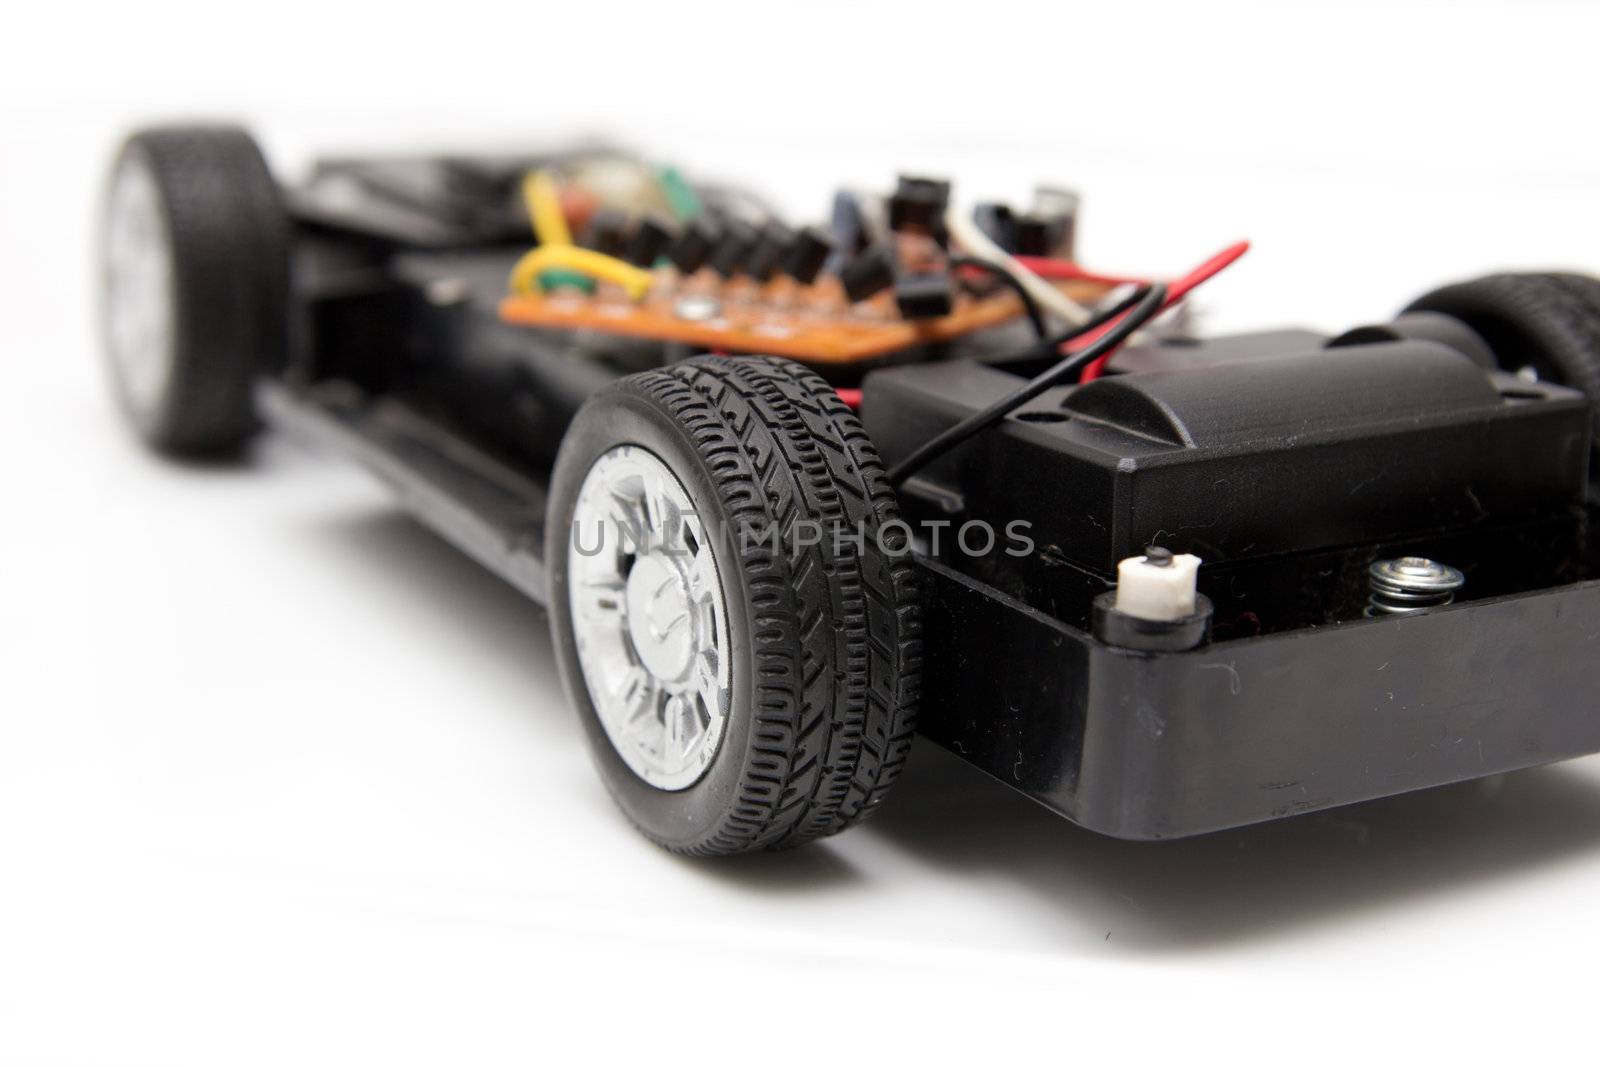 disassembled toy car on a white background